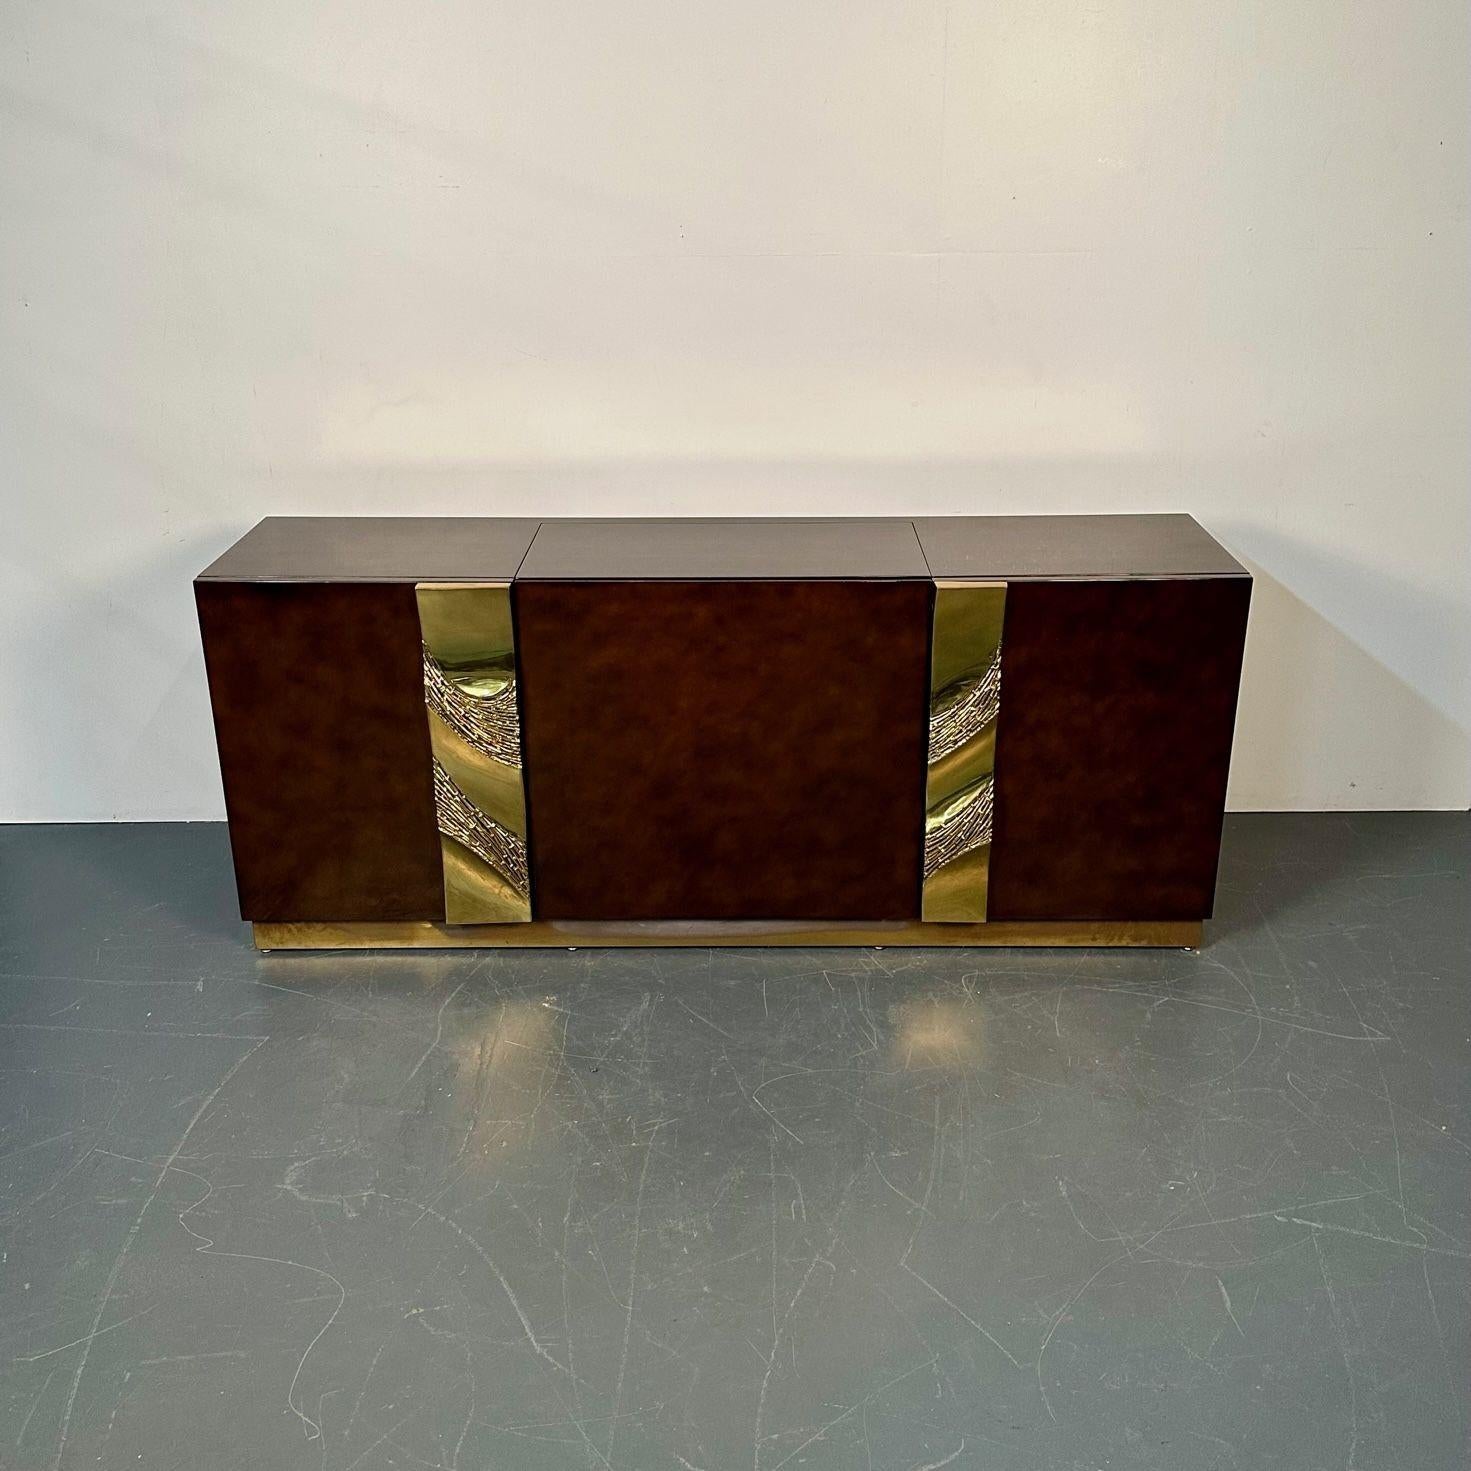 Italian Mid-Century Modern Bar / Entertainment Cabinet, Aldo Tura Style, Lacquer

This absolutely stunning bar cabinet or entertainment center is simply to good to be true. The case having a flip down center cabinet that converts to a lighted